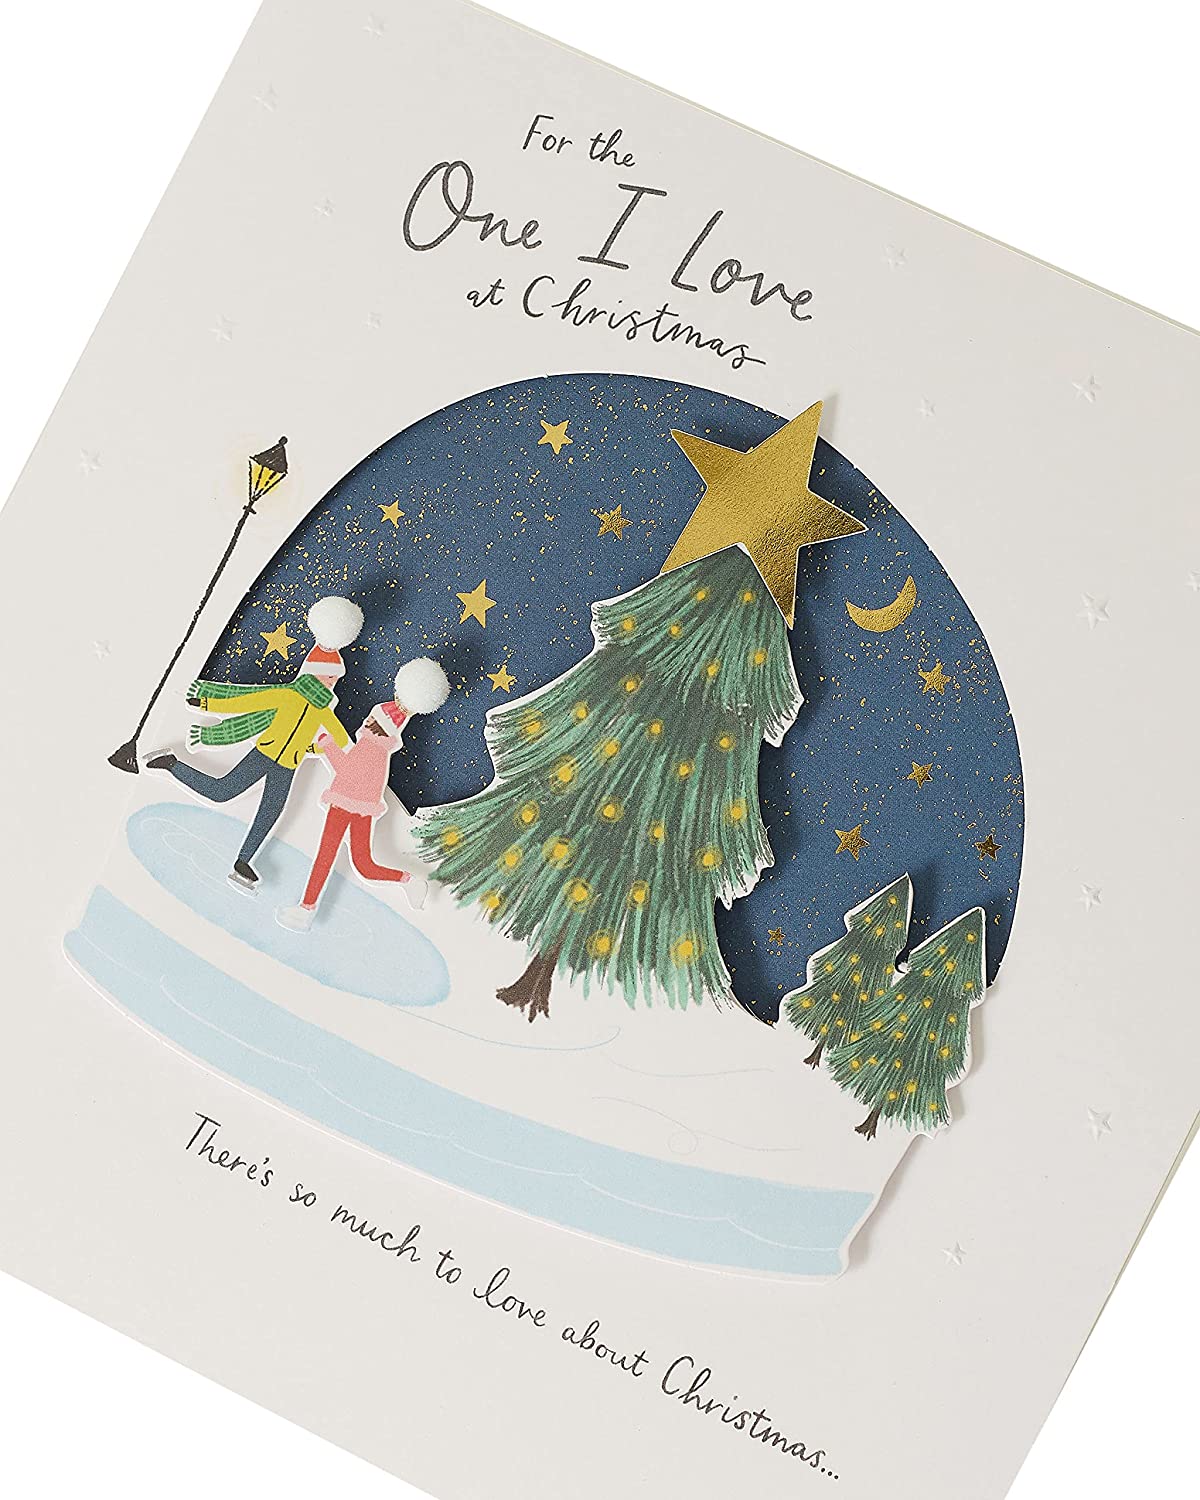 Ice Skaters in Snow Globe for One I Love Romantic Christmas Card